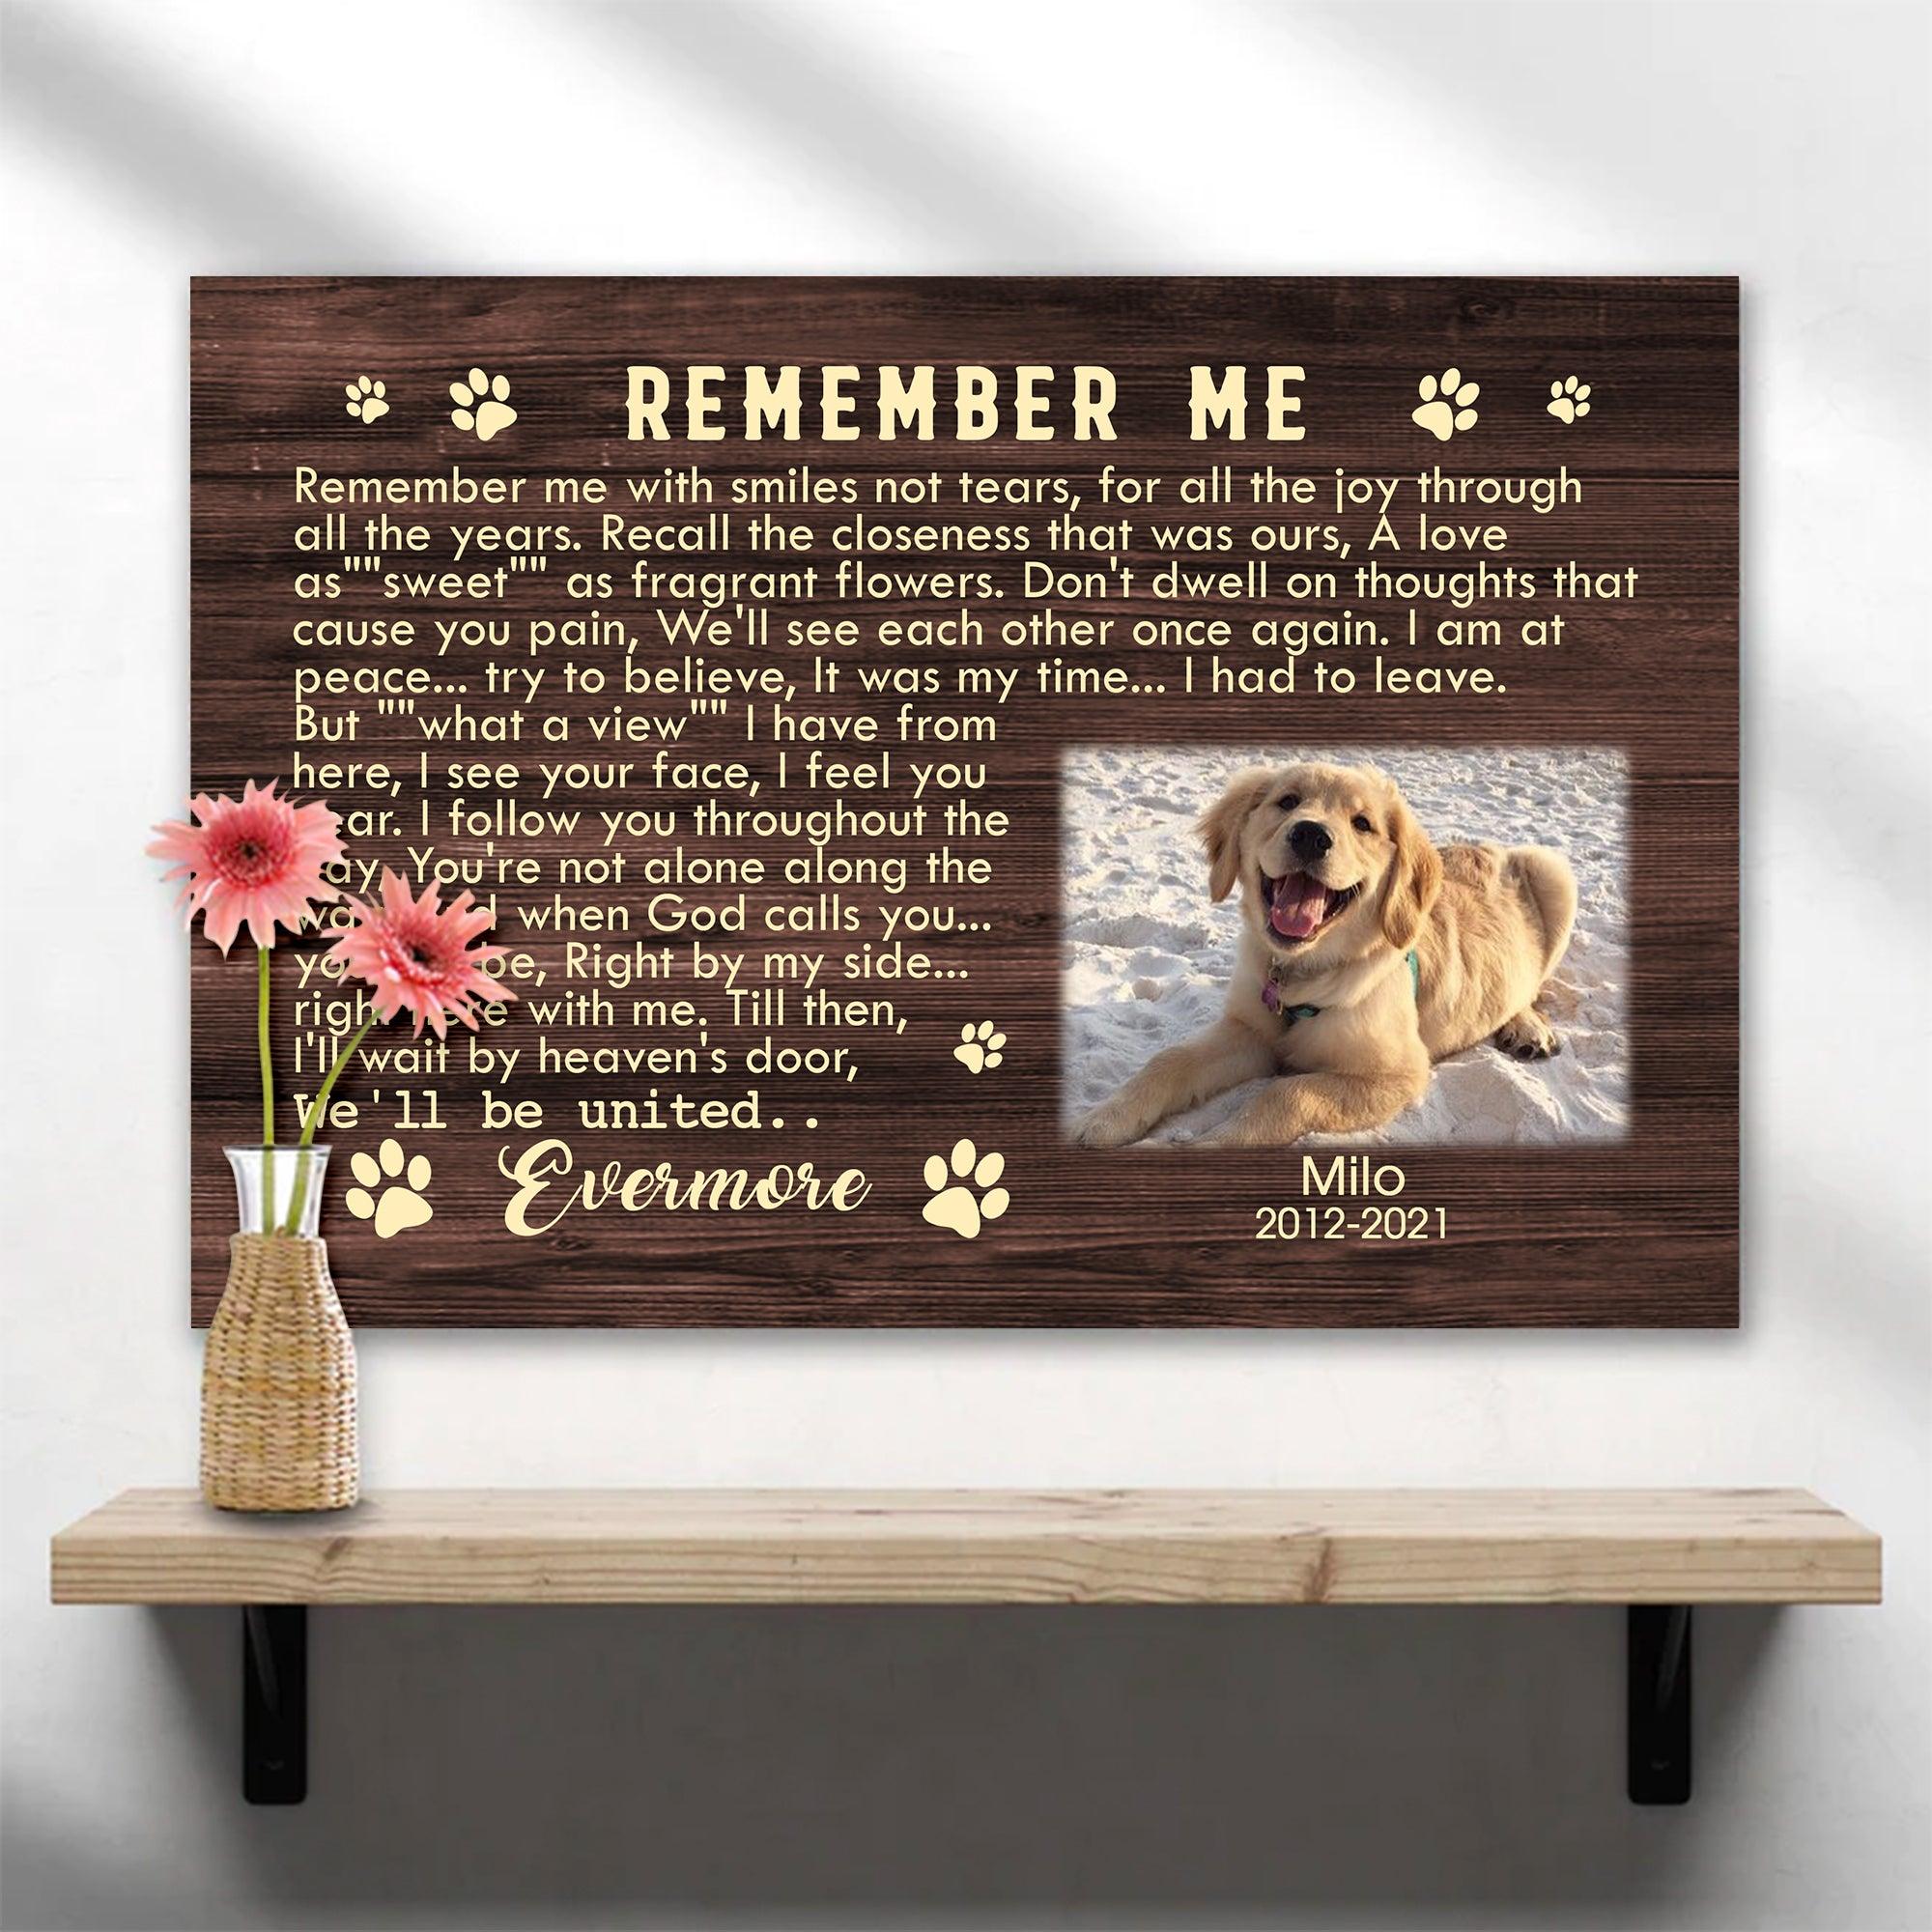 Dog Memorial Gift Wall Art When Tomorrow Starts Without Me -  Portugal